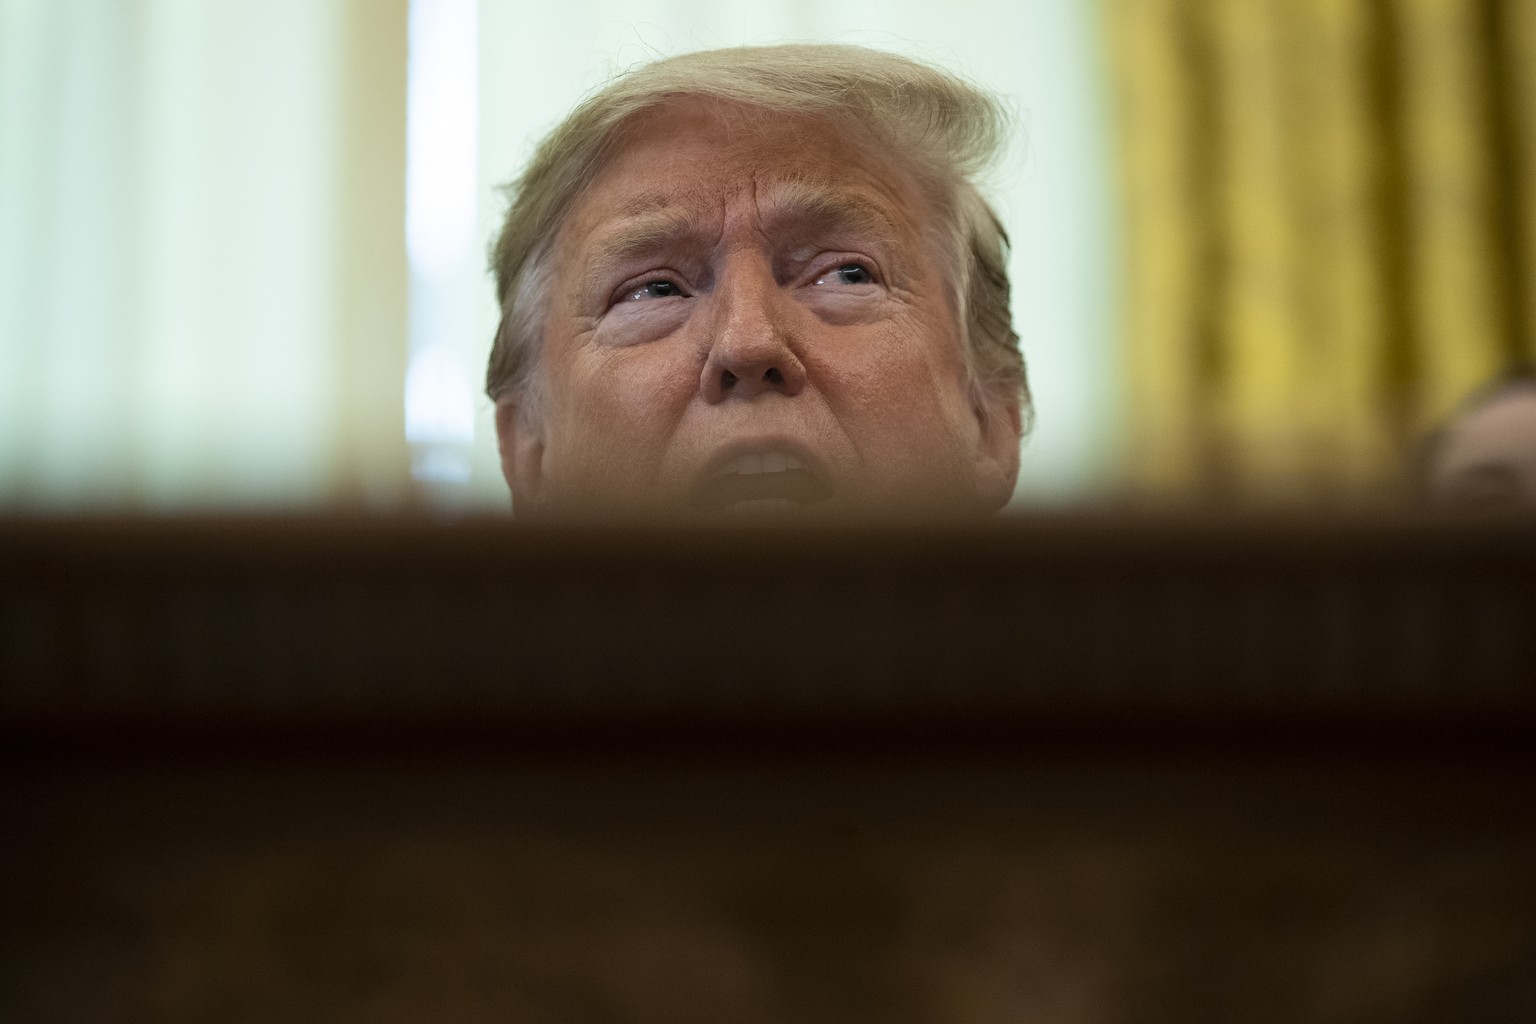 President Donald Trump speaks during an event on prayer in public schools, in the Oval Office of the White House, Thursday, Jan. 16, 2020, in Washington. (AP Photo/ Evan Vucci)
Donald Trump